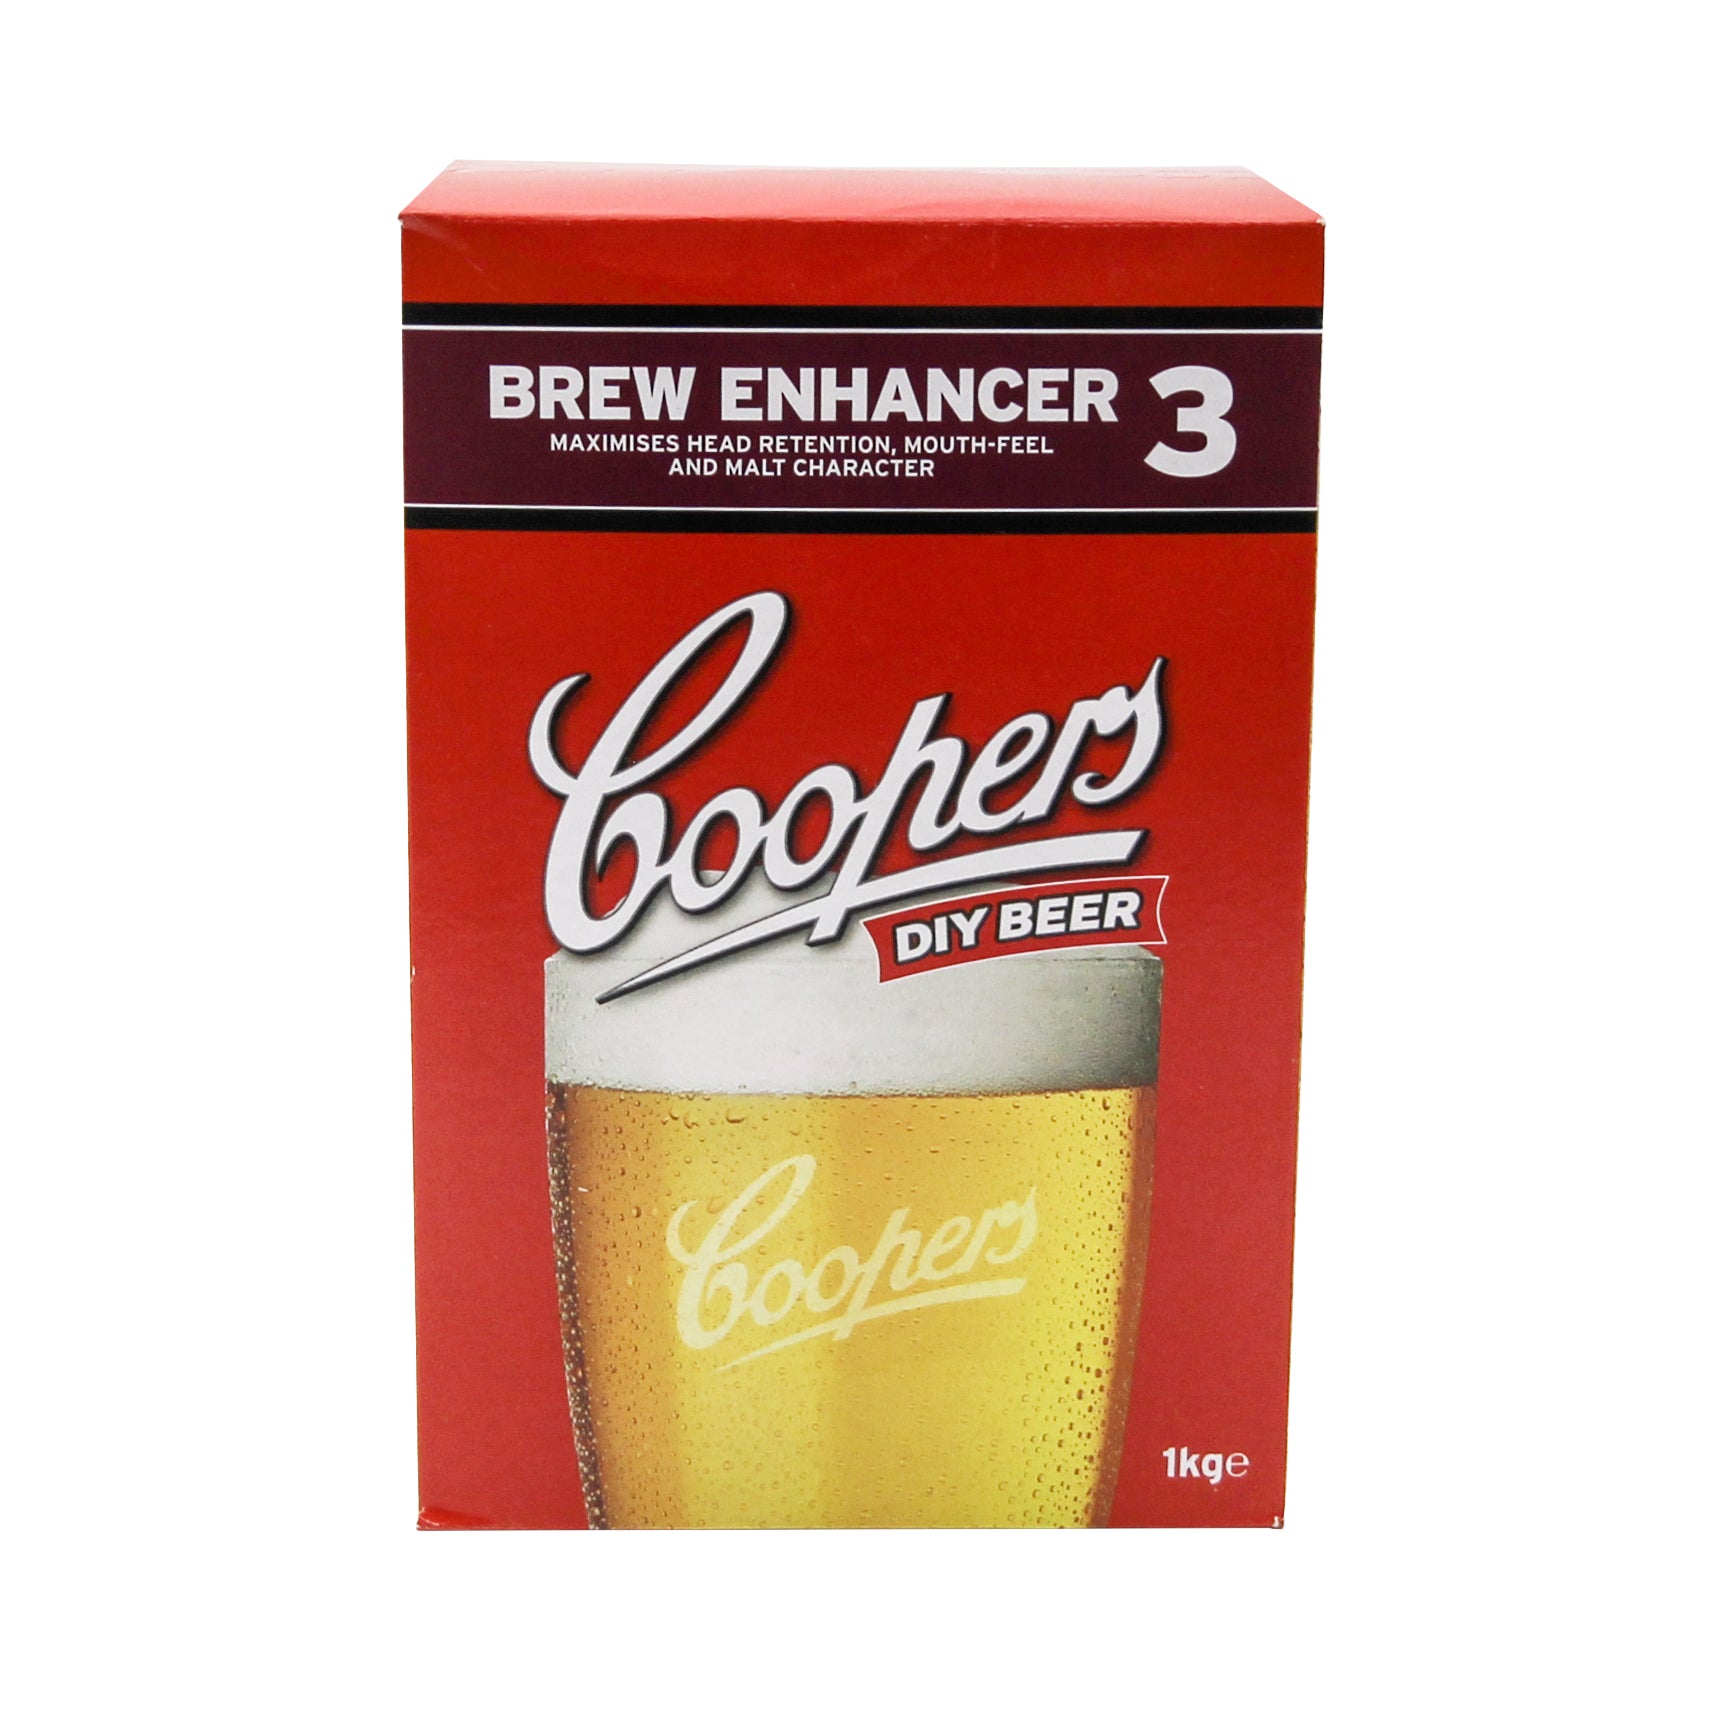 1kg box of Coopers brew enhancer number three